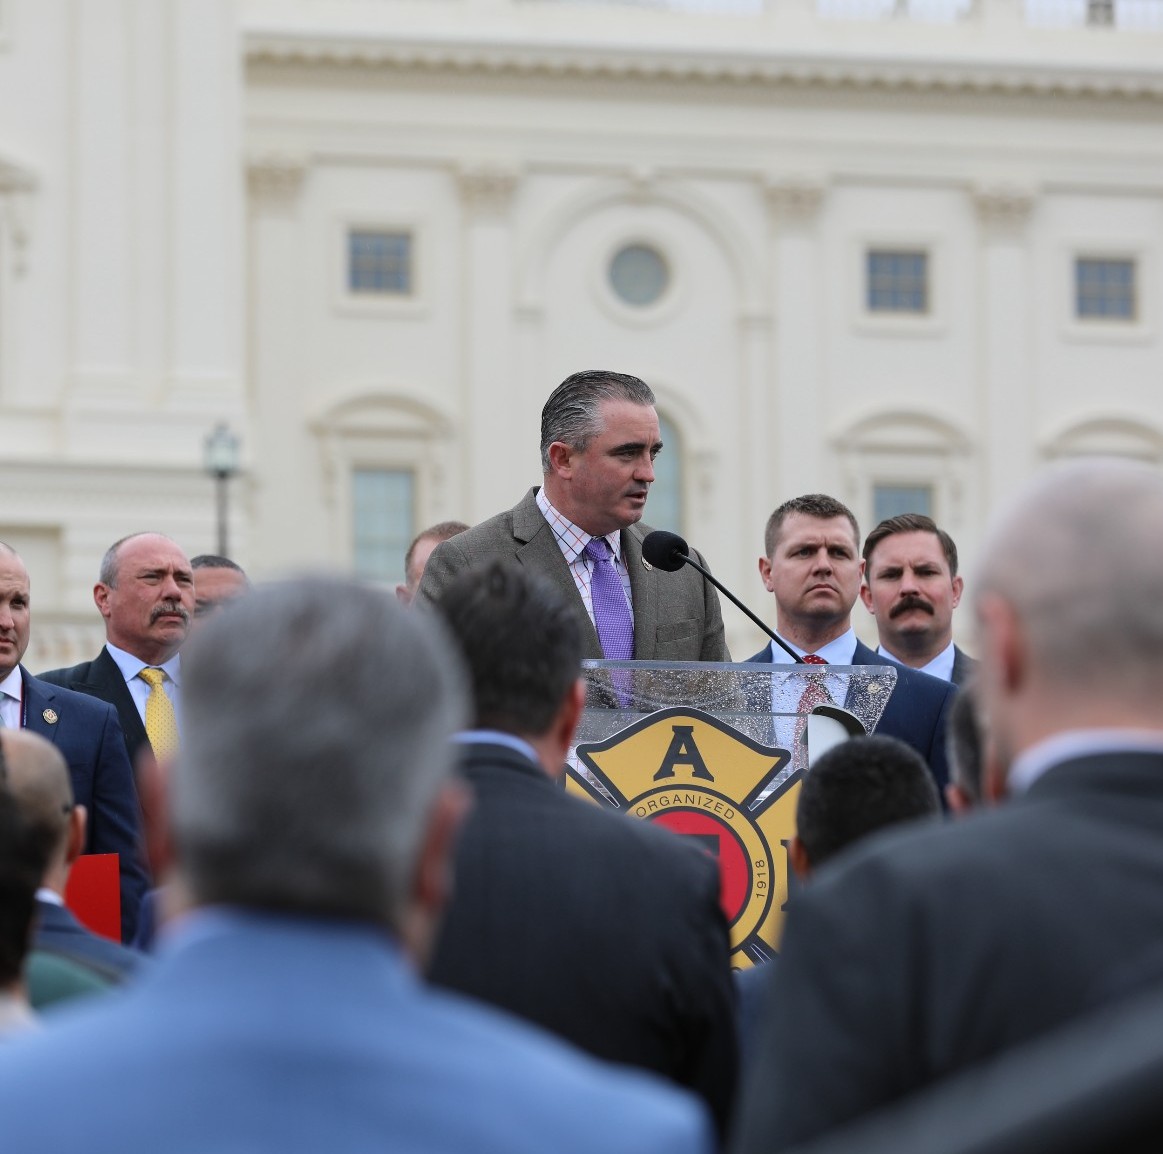 “You are being robbed of what you have rightfully earned for you and your family.” @iaffpresident #LEGCON24 Learn about the Social Security Fairness Act and why we rallied at Capitol Hill demanding a repeal of #WEPGPO ➡️ brnw.ch/21wHBni